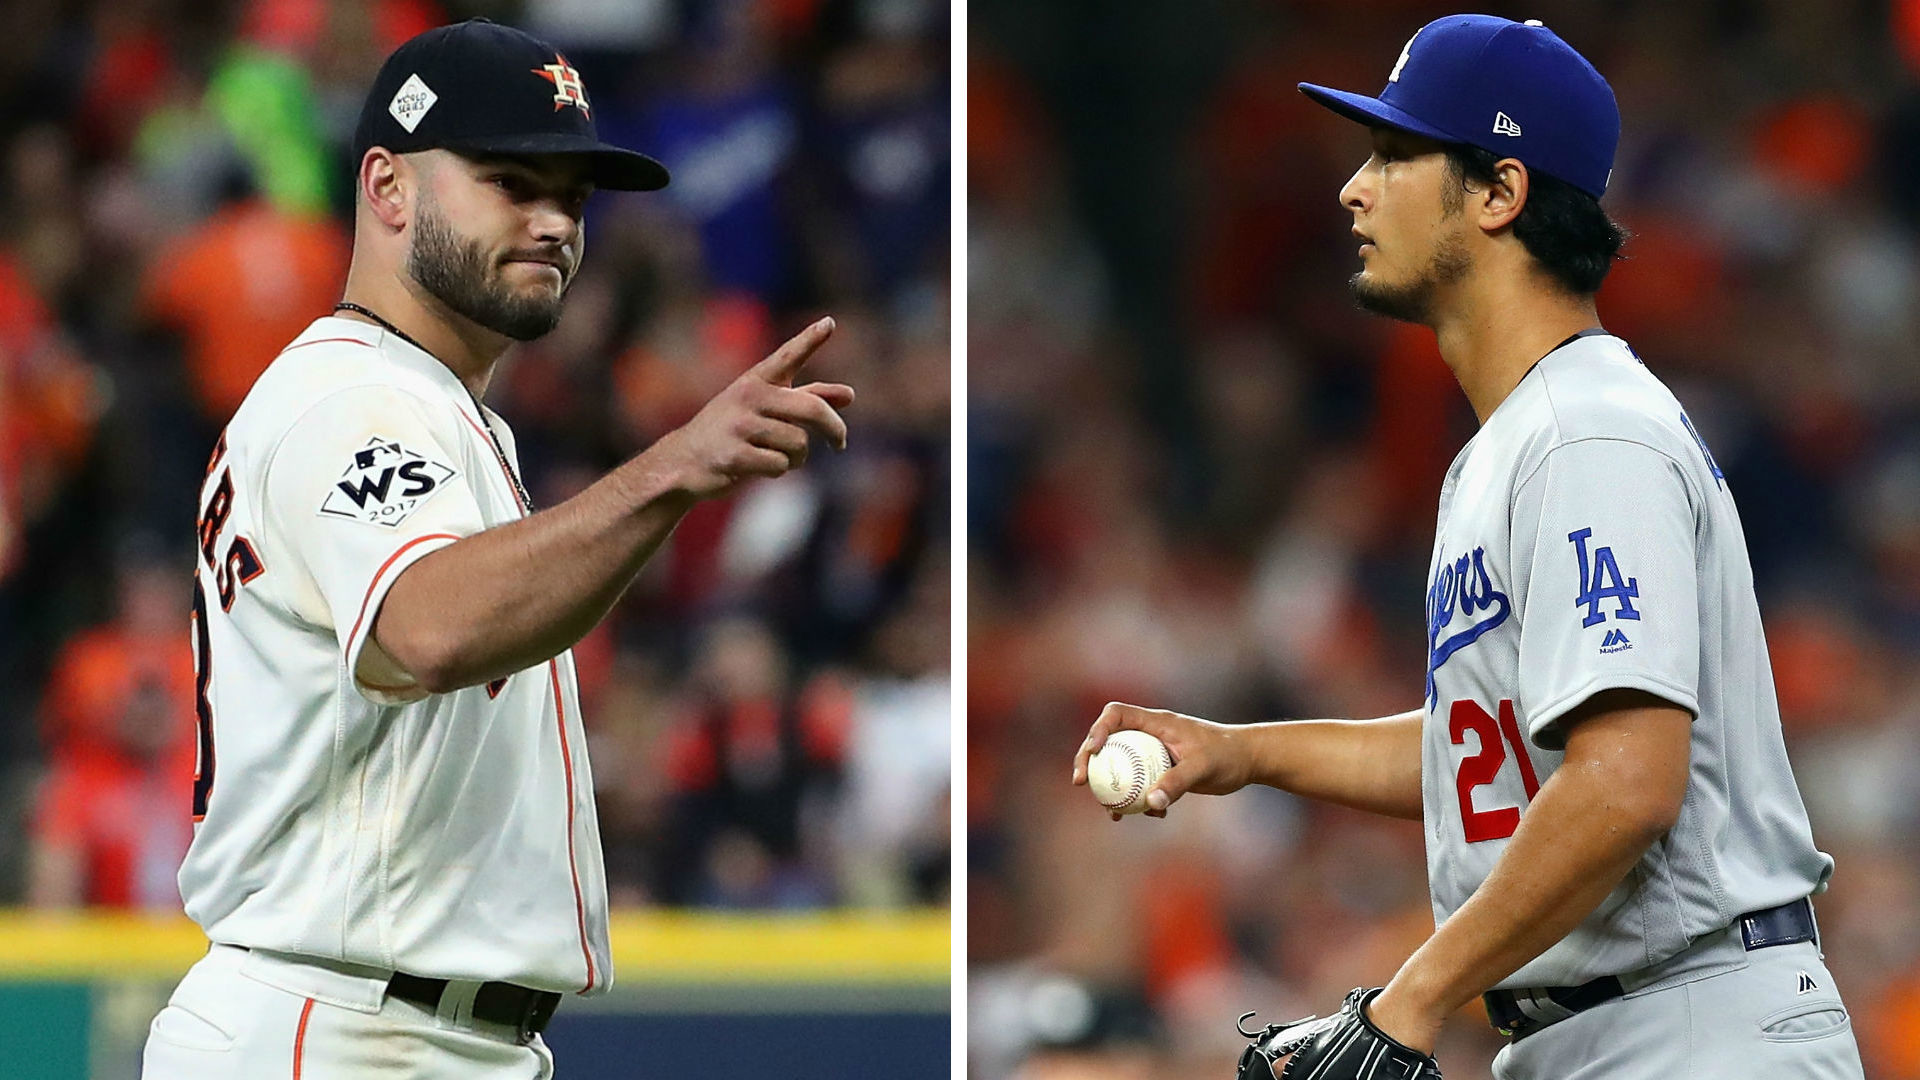 1920x1080 World Series 2017: Yu Darvish, Lance McCullers Jr. ready for rematch in Game